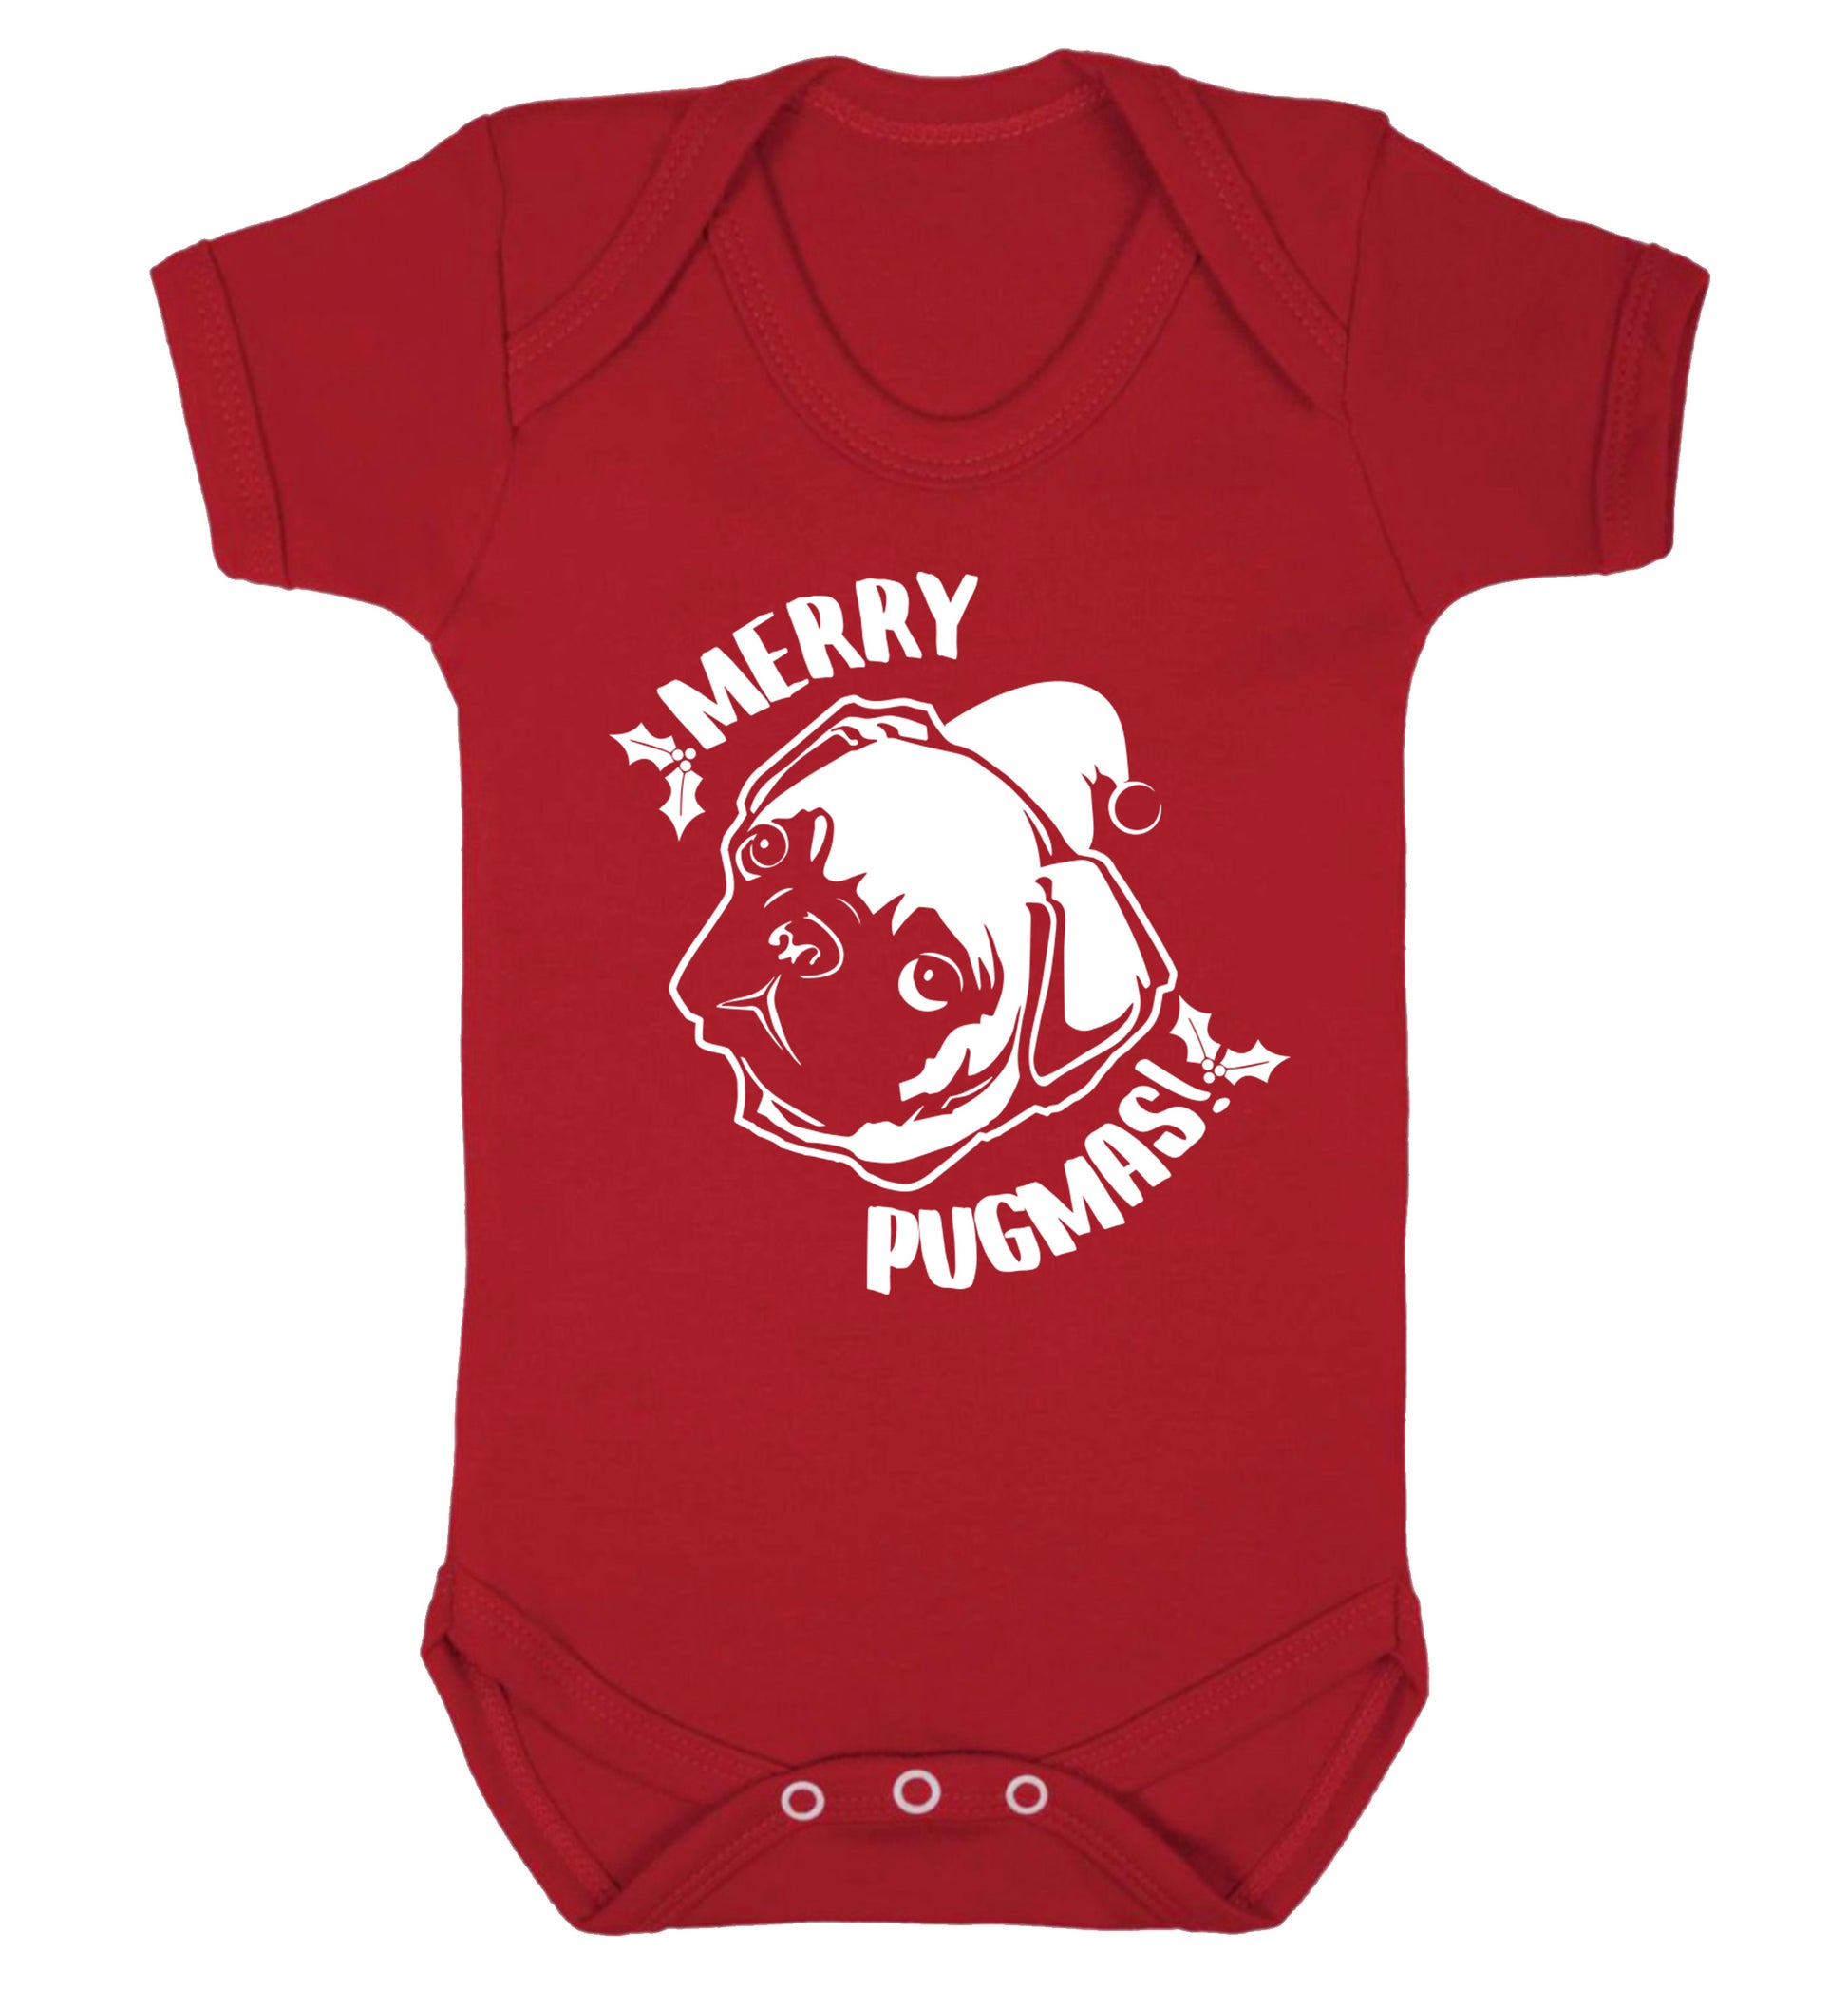 Merry Pugmas Baby Vest red 18-24 months